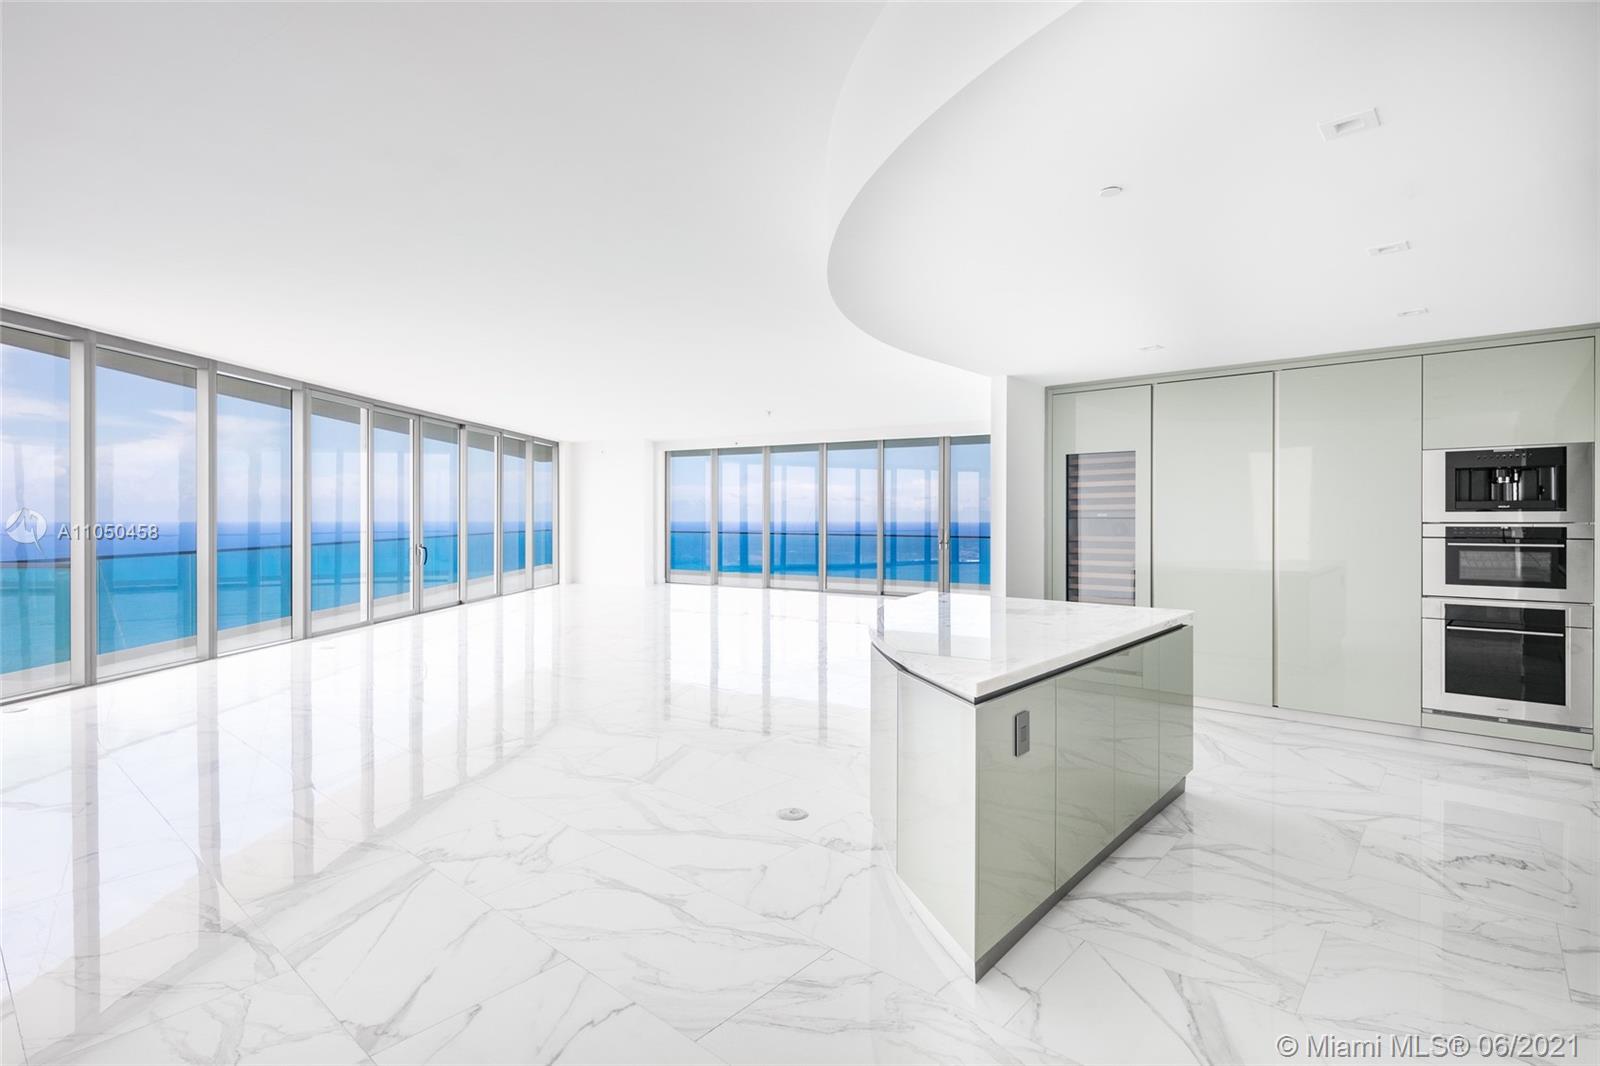 Highest Floor Available in the Best Line "00" at Residences at Armani Casa. Residence #5100, finished with oversized Italian tile, is the largest corner layout (4bed/5.5 bath + Service) and the only line with a private foyer. Enjoy breathtaking direct ocean and sweeping intracoastal views from all areas. The interior living space is spacious, modern & elegant with 10 Ft ceilings. Expansive 10 foot-deep balconies with summer kitchen create a seamless expansion of living space into the fresh air. Sleek European kitchen. Smart residence w/digital thermostat. Impeccable main suite with midnight bar, his & hers baths with breathtaking ocean view. Armani Casa residents can indulge in beach service, full service spa, private restaurant, game room, cigar/wine room, & child's play room.